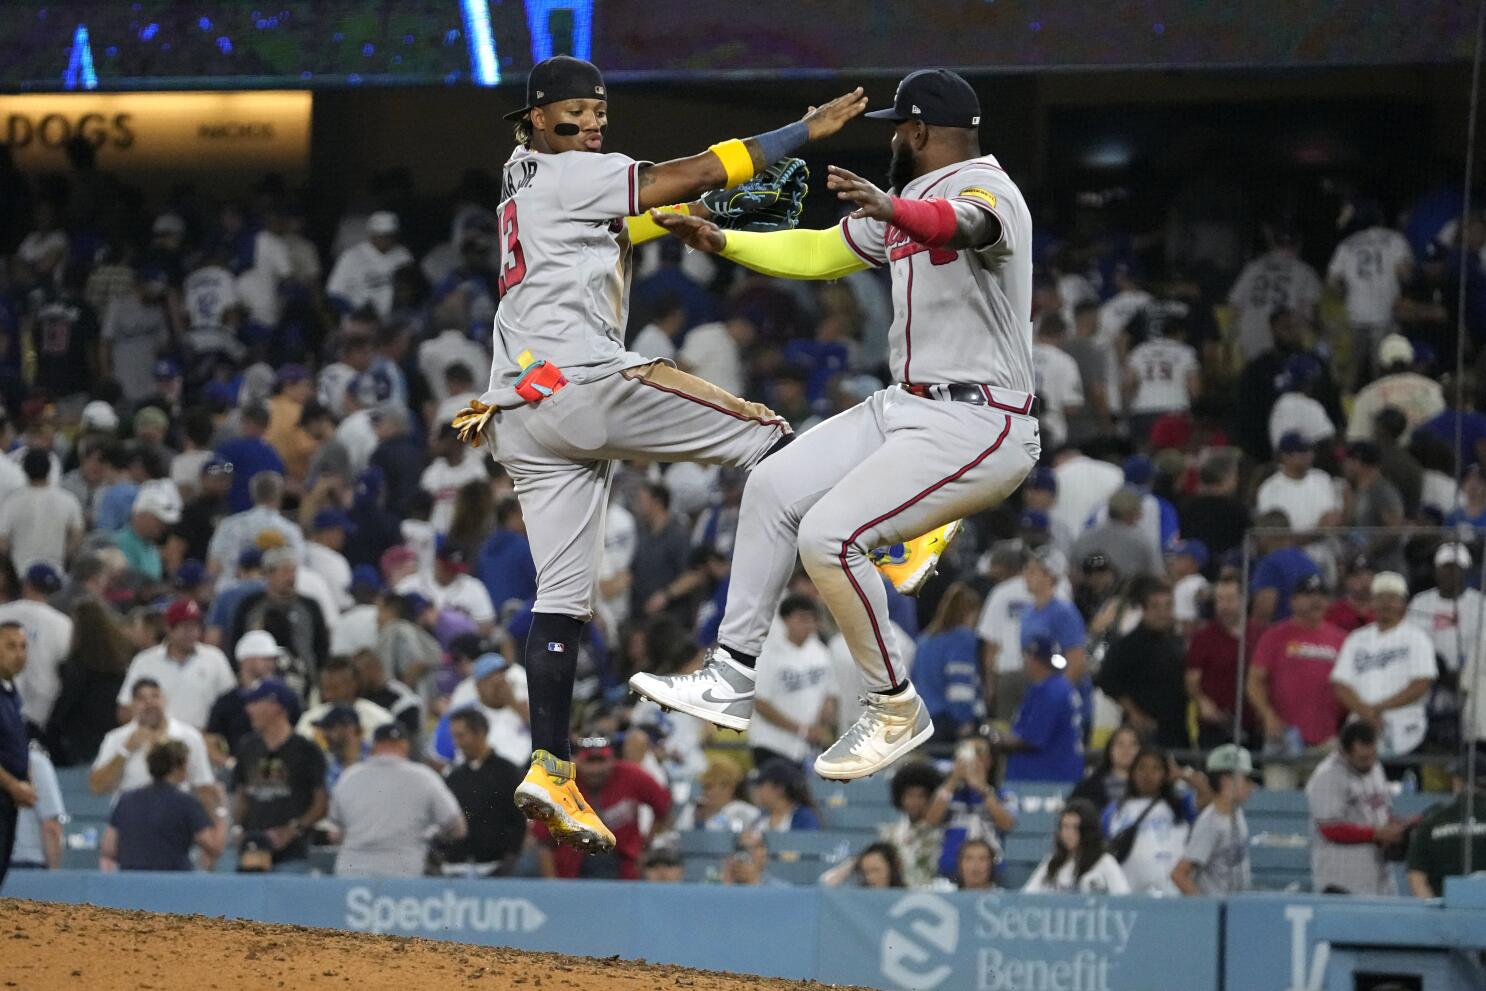 Braves star Ronald Acuña Jr. gets married, then hits grand slam to become  1st 30-HR, 60-SB player - The San Diego Union-Tribune